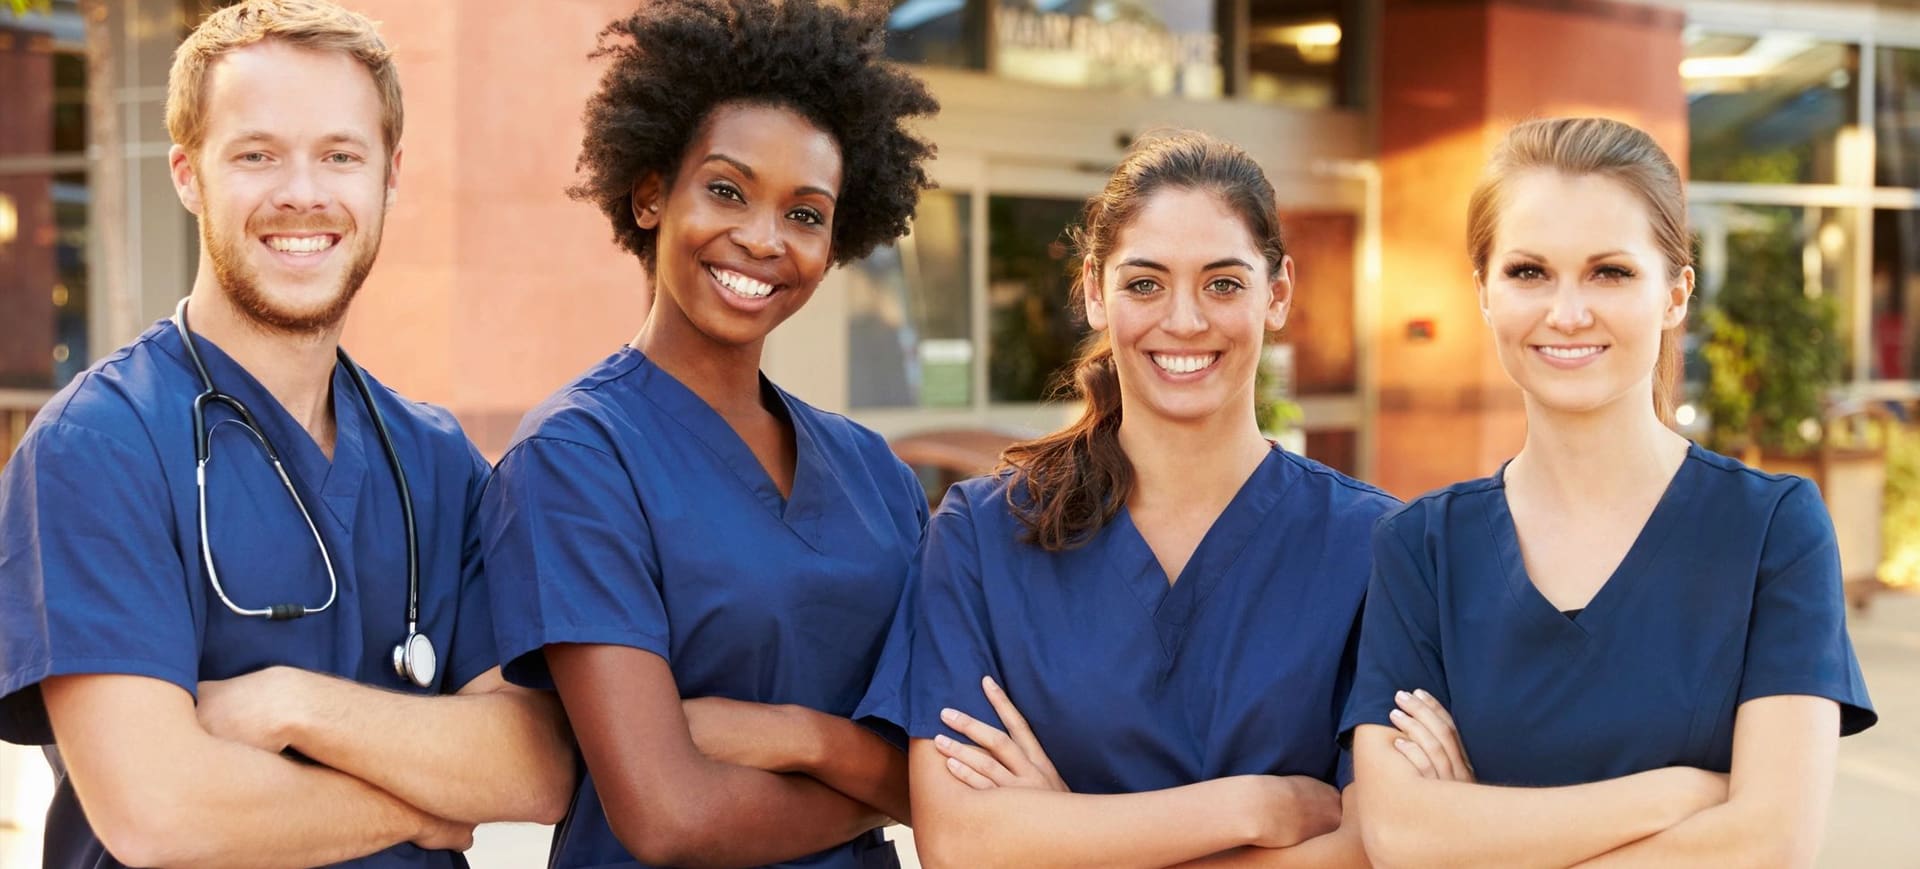 Two nurses standing next to each other smiling.